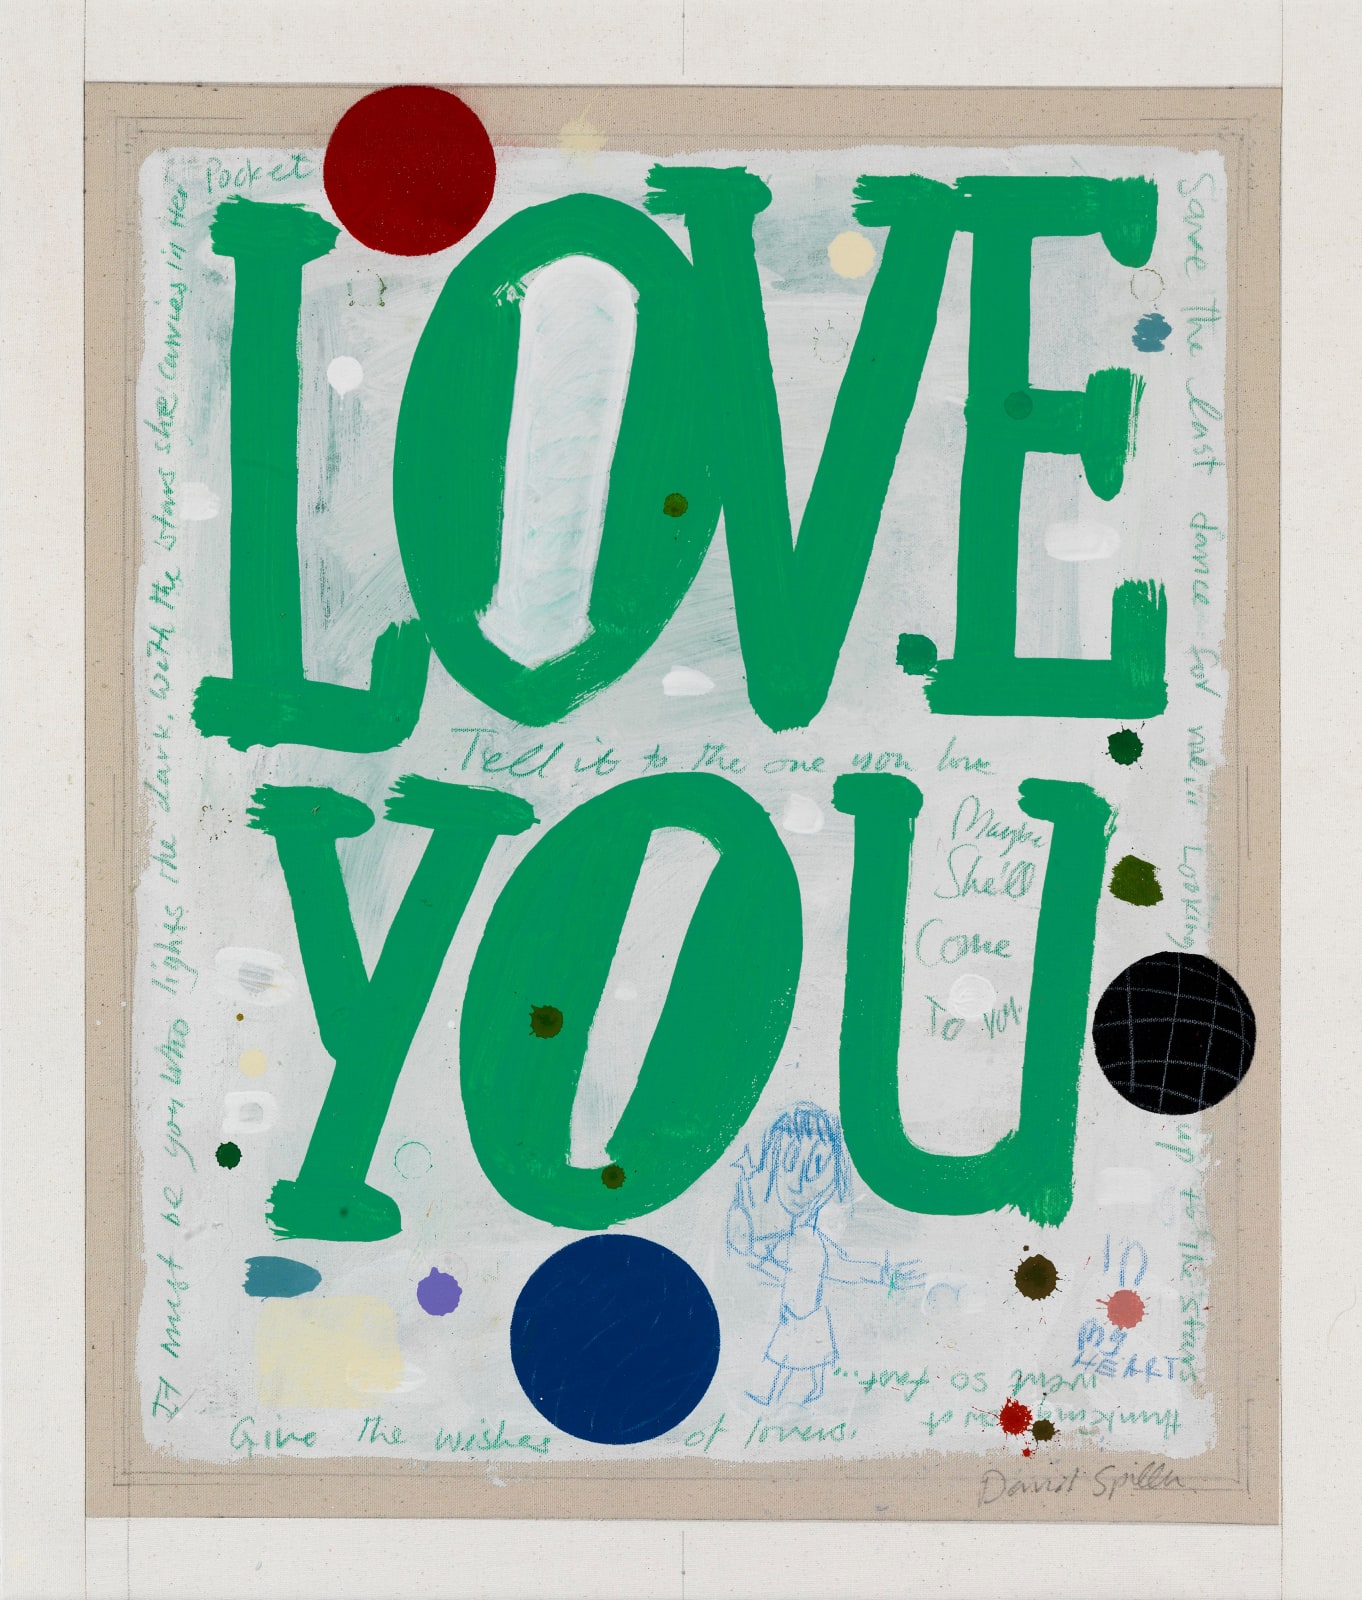 David Spiller, Tell it to the one you love, 2014